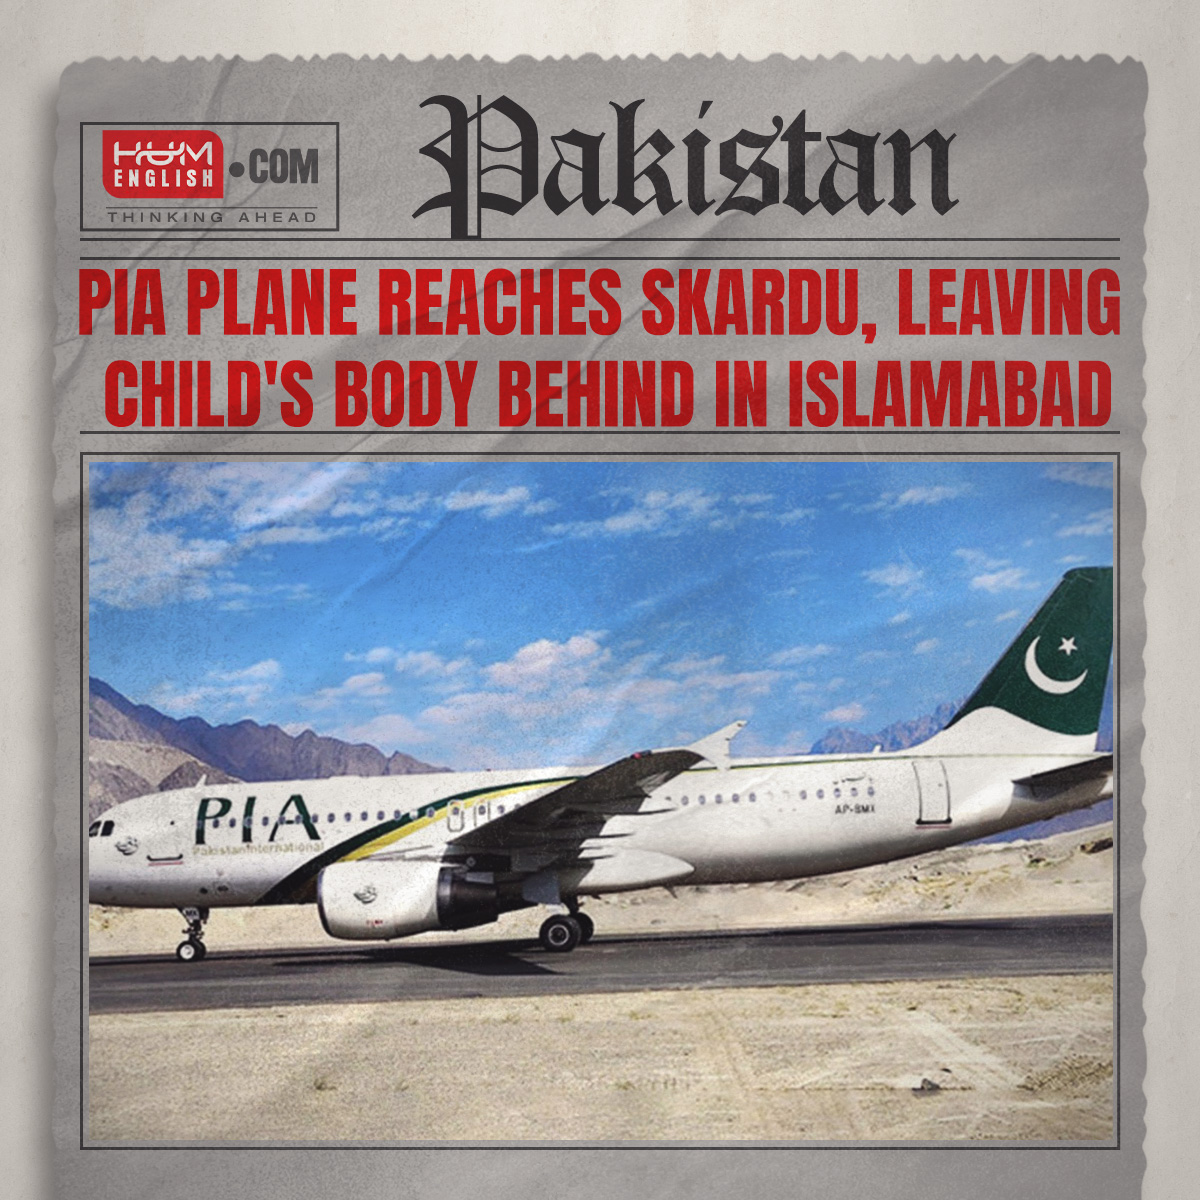 PIA plane reaches Skardu, leaving child's body behind in Islamabad Read more: ow.ly/Vp4Q50RBSG1